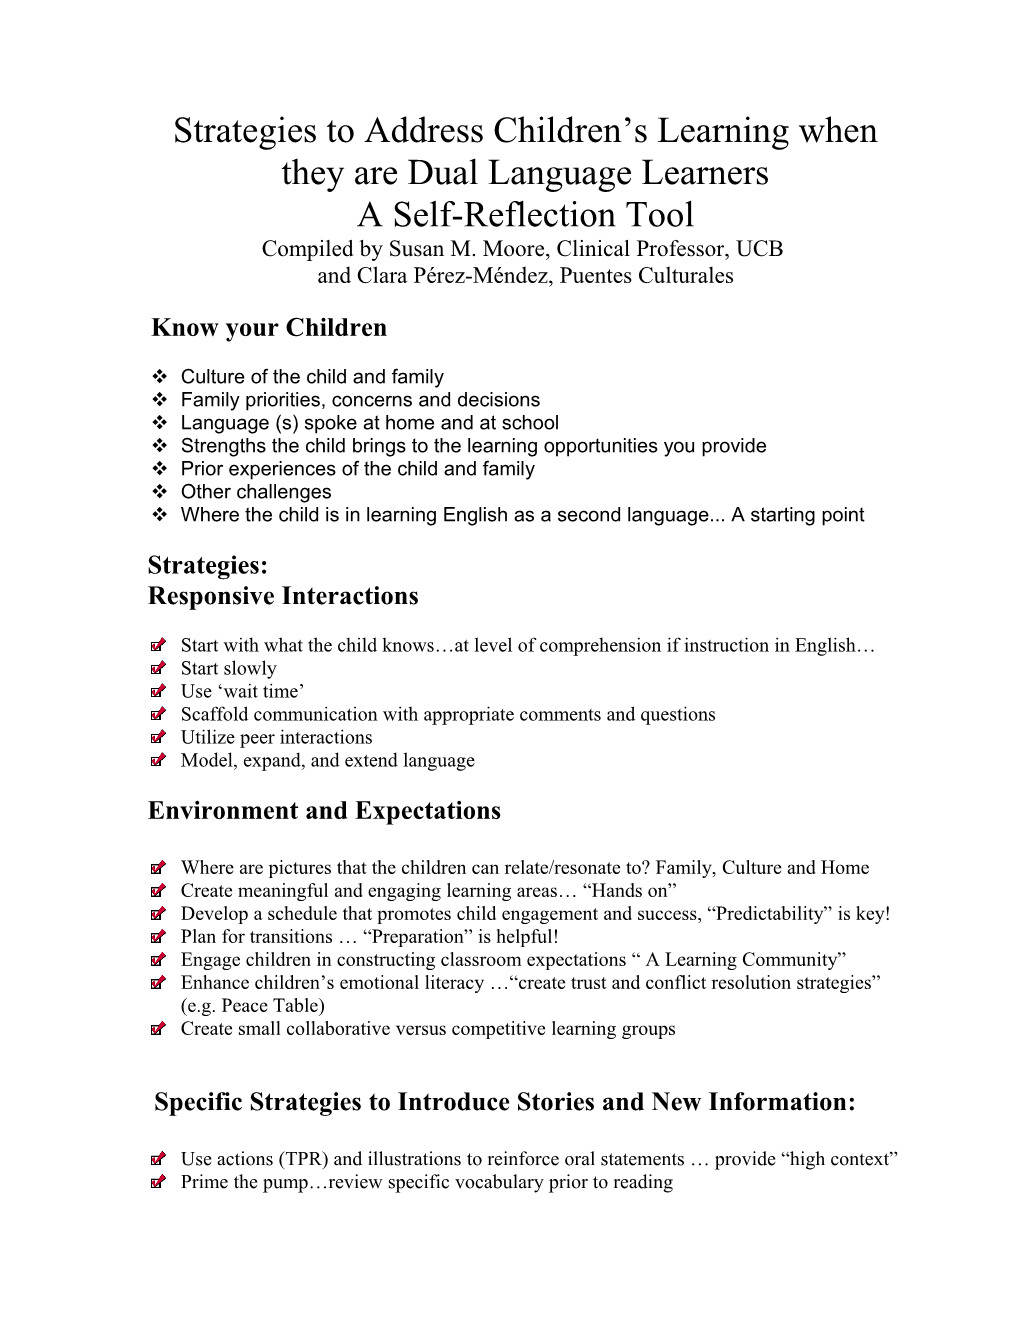 Strategies to Address Children S Learning When They Are Dual Language Learners